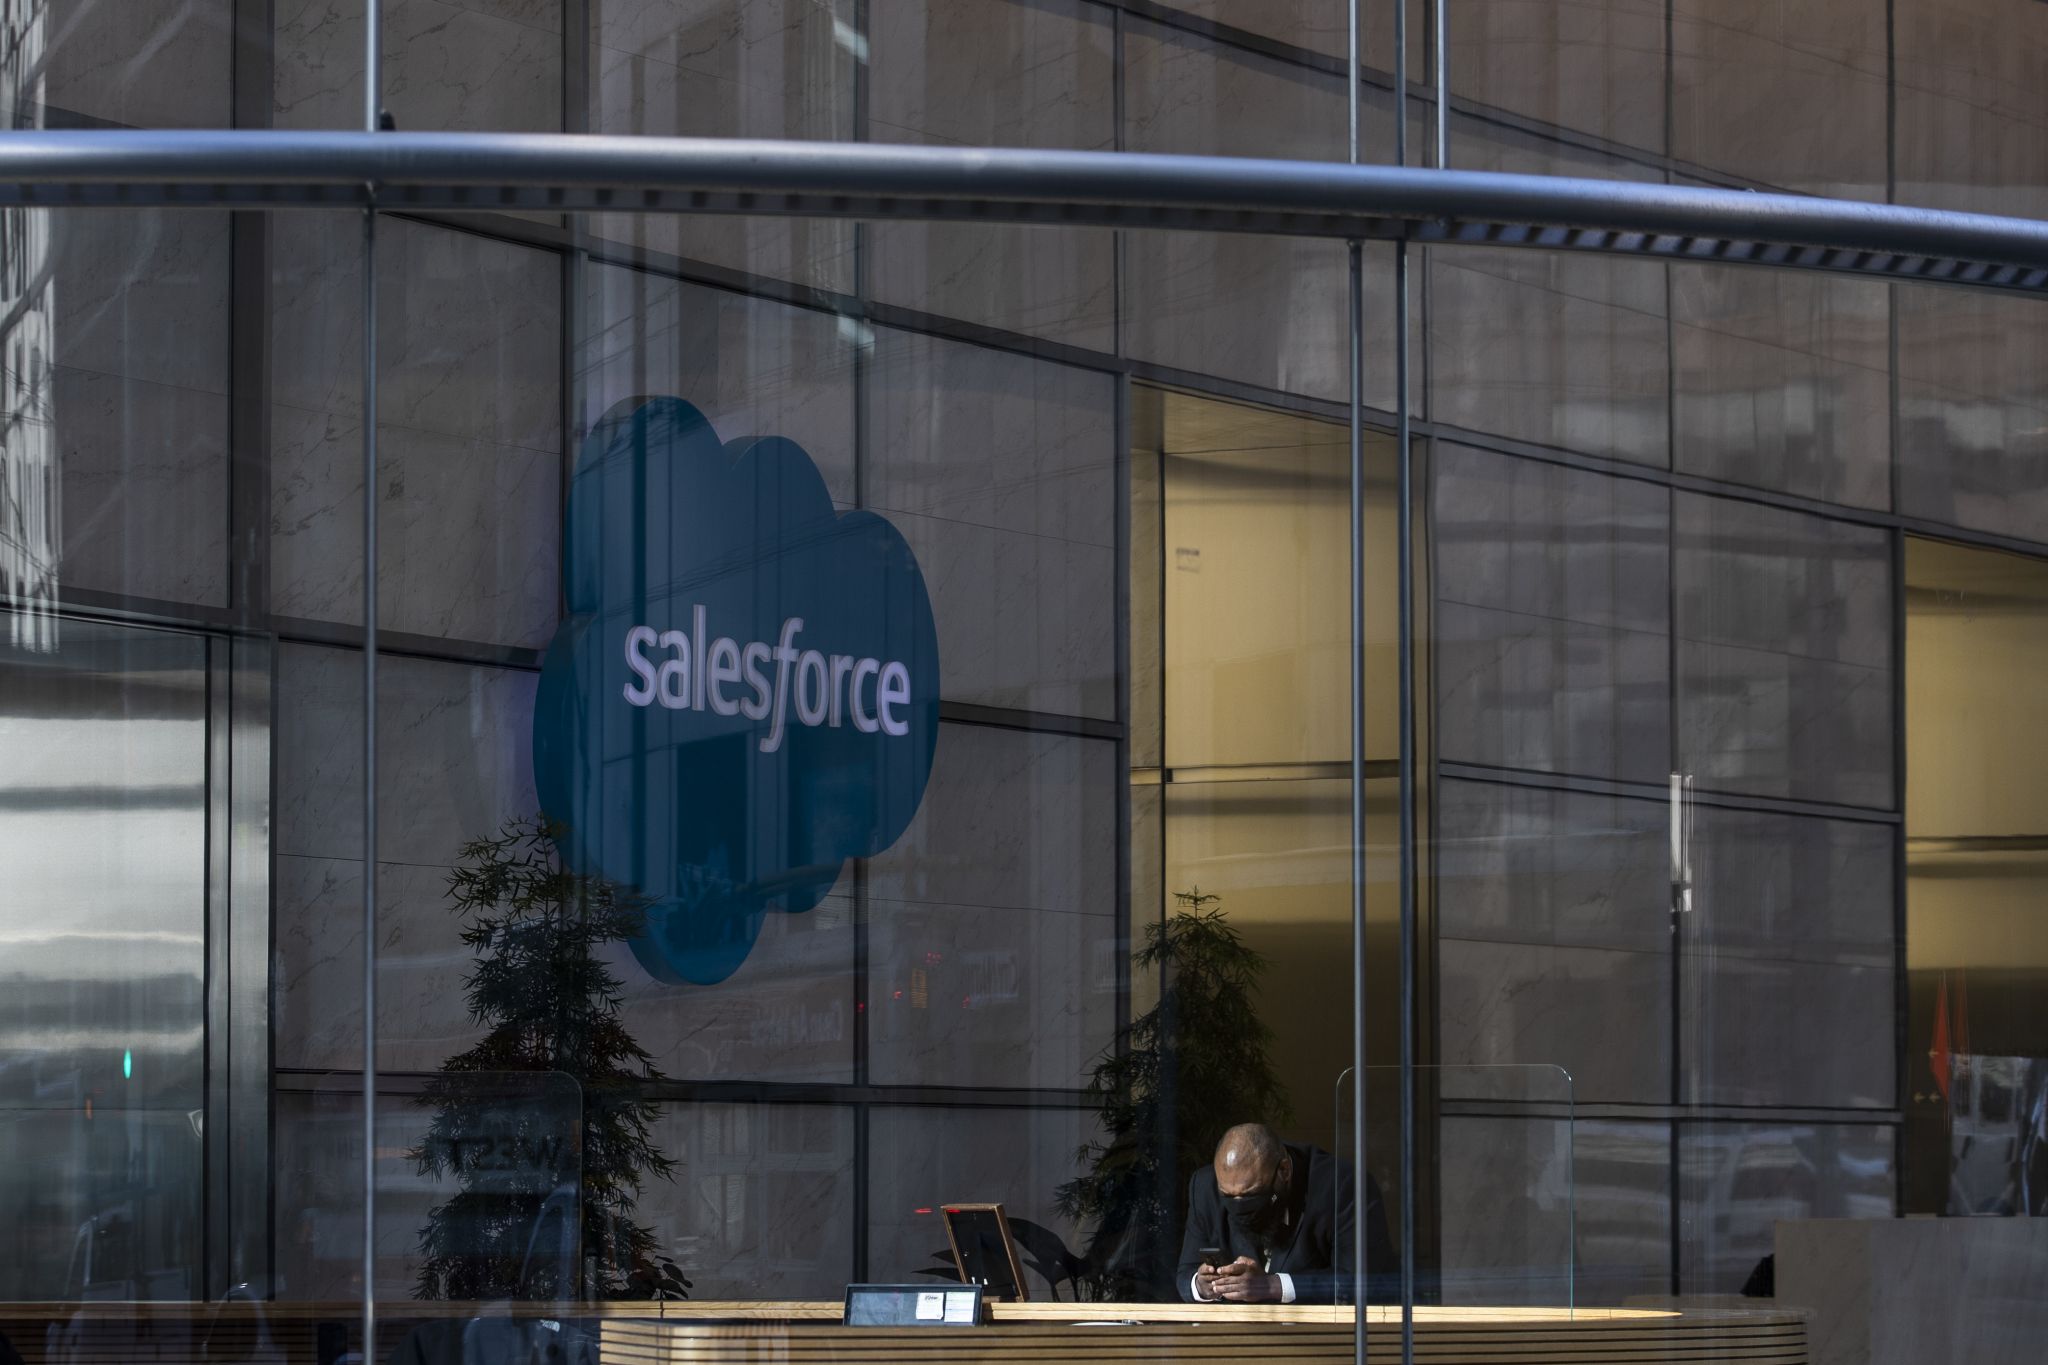 Employees at Salesforce, San Francisco’s largest private employer, are urging executives to cease their working relationship with the National Rifle